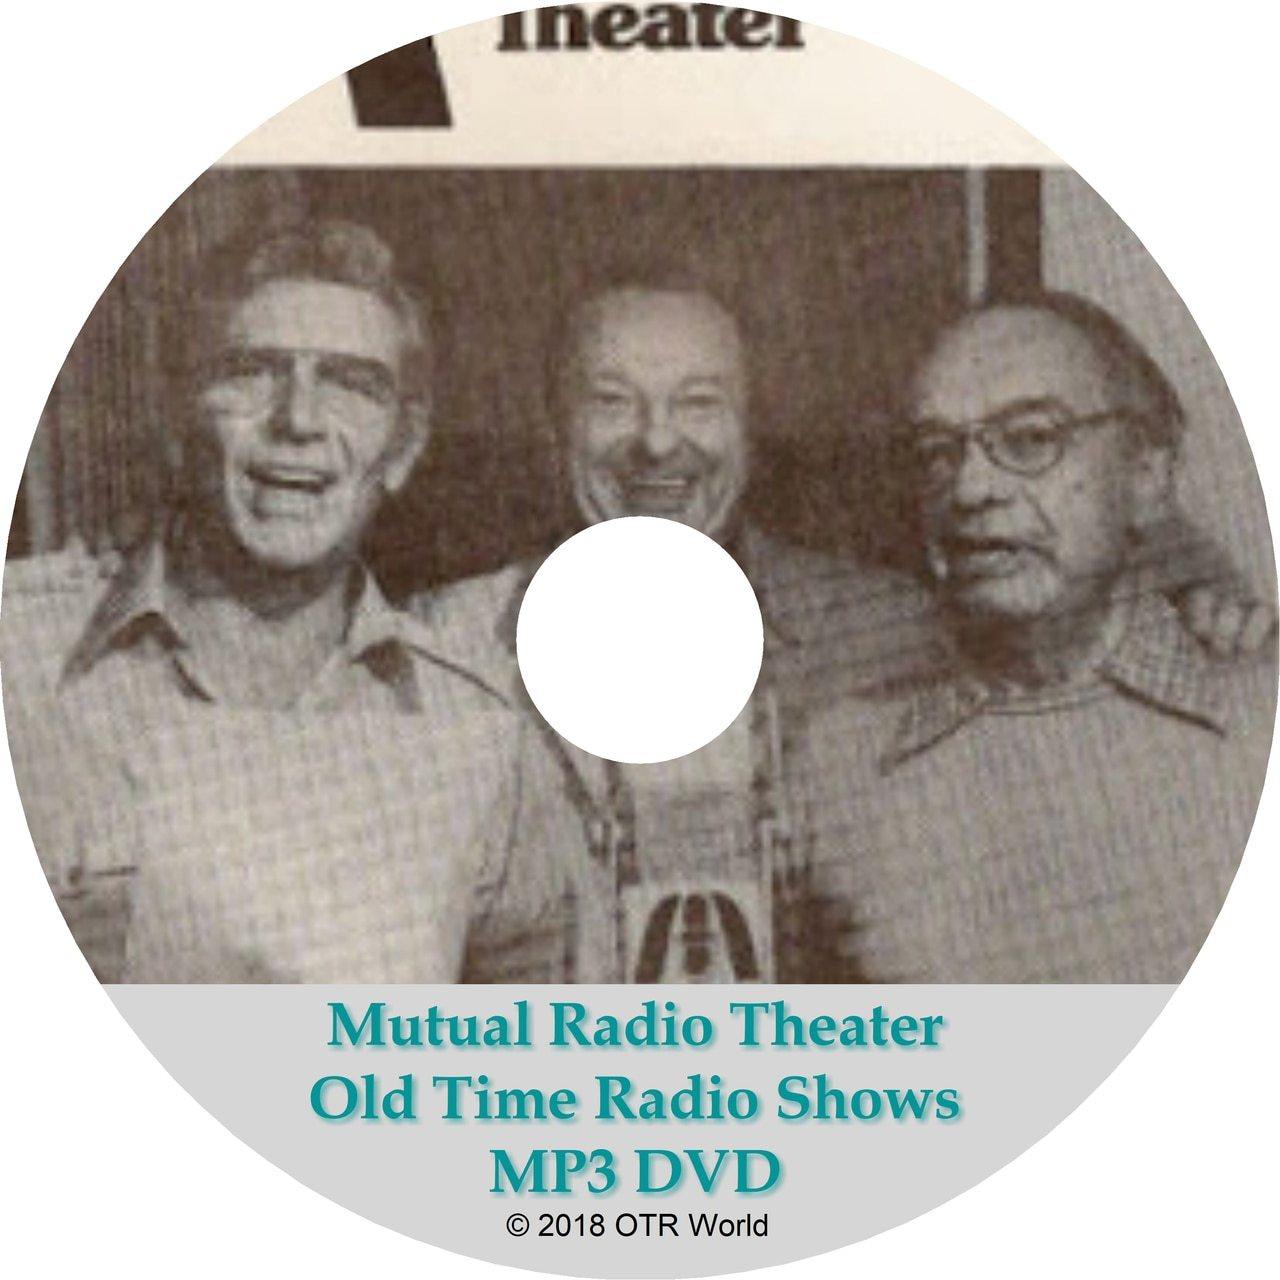 Mutual Radio Theater Old Time Radio Shows 106 Episodes On MP3 DVD - OTR World